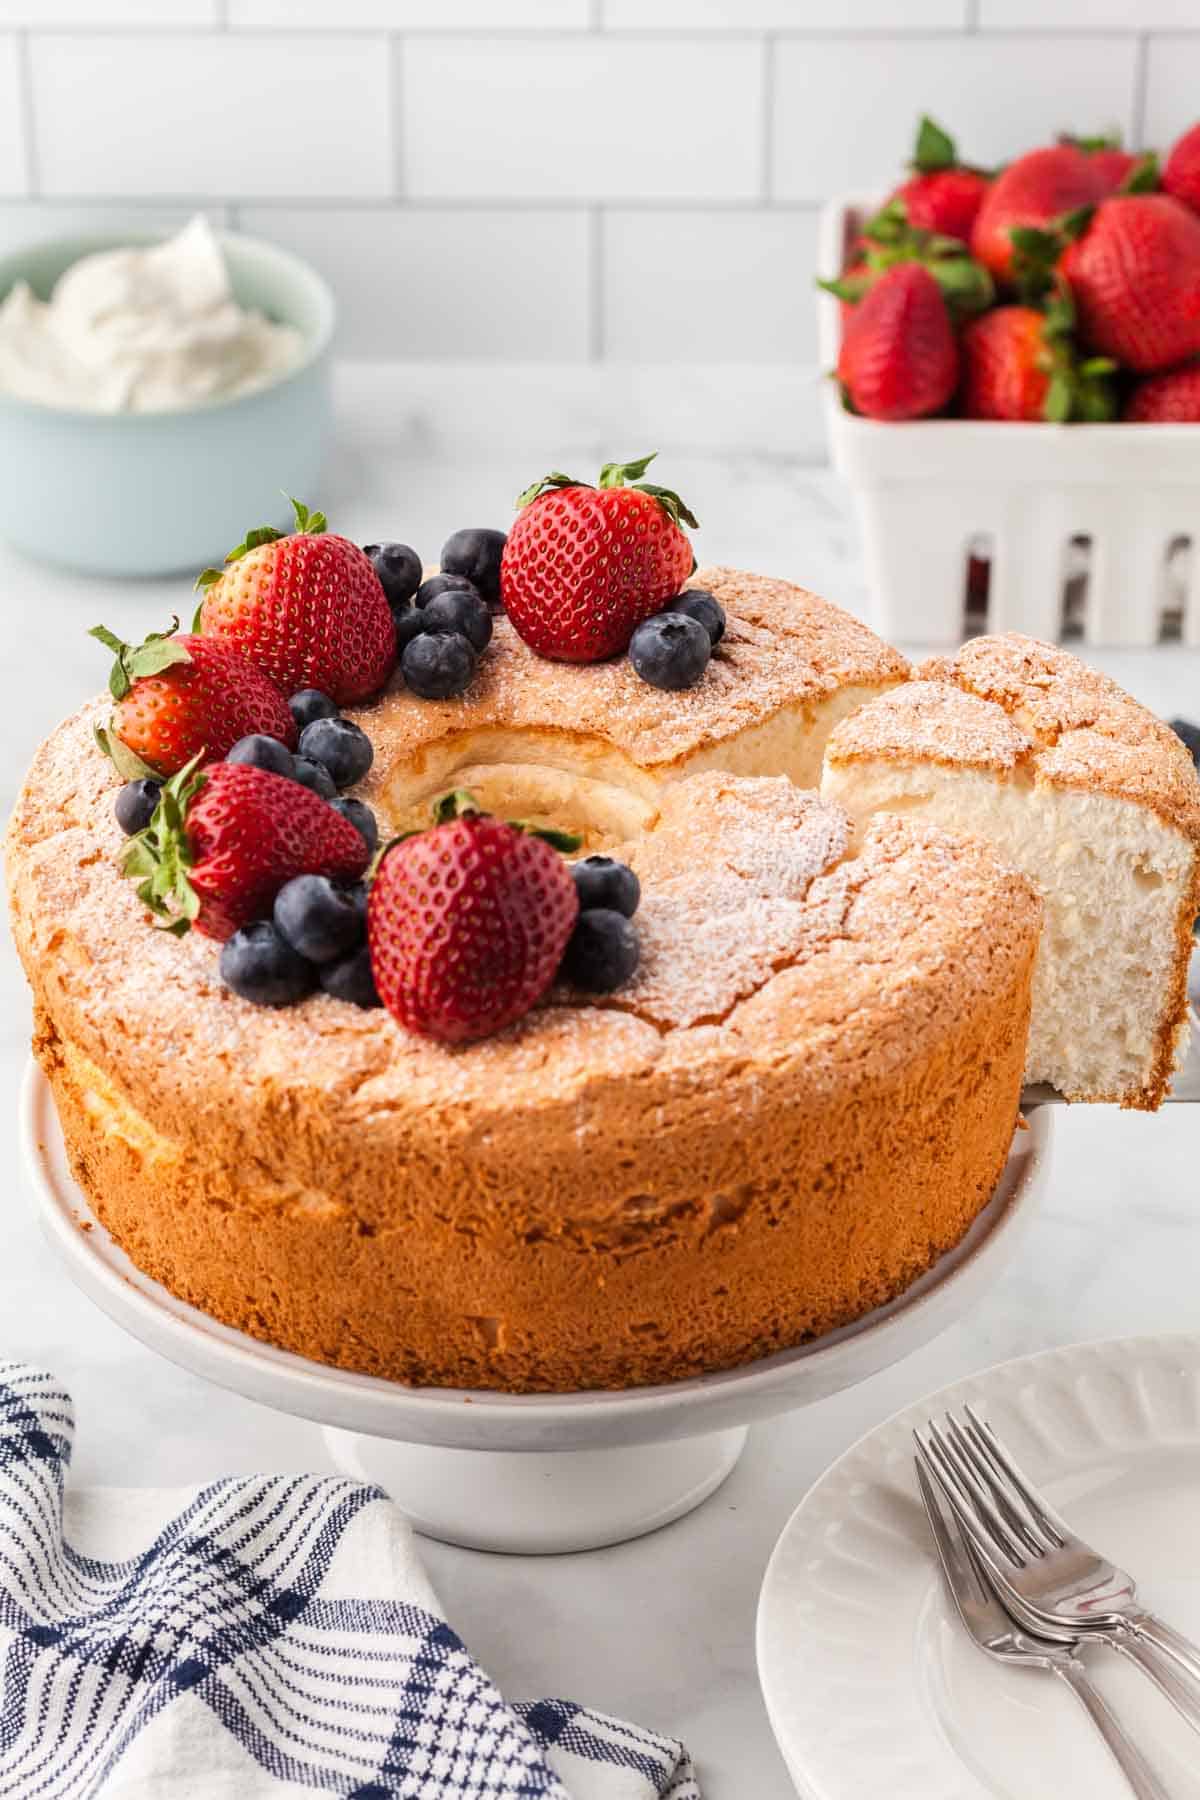 A gluten-free angel food cake is shown on a cake stand topped with strawberries and blueberries with a slice cut out.